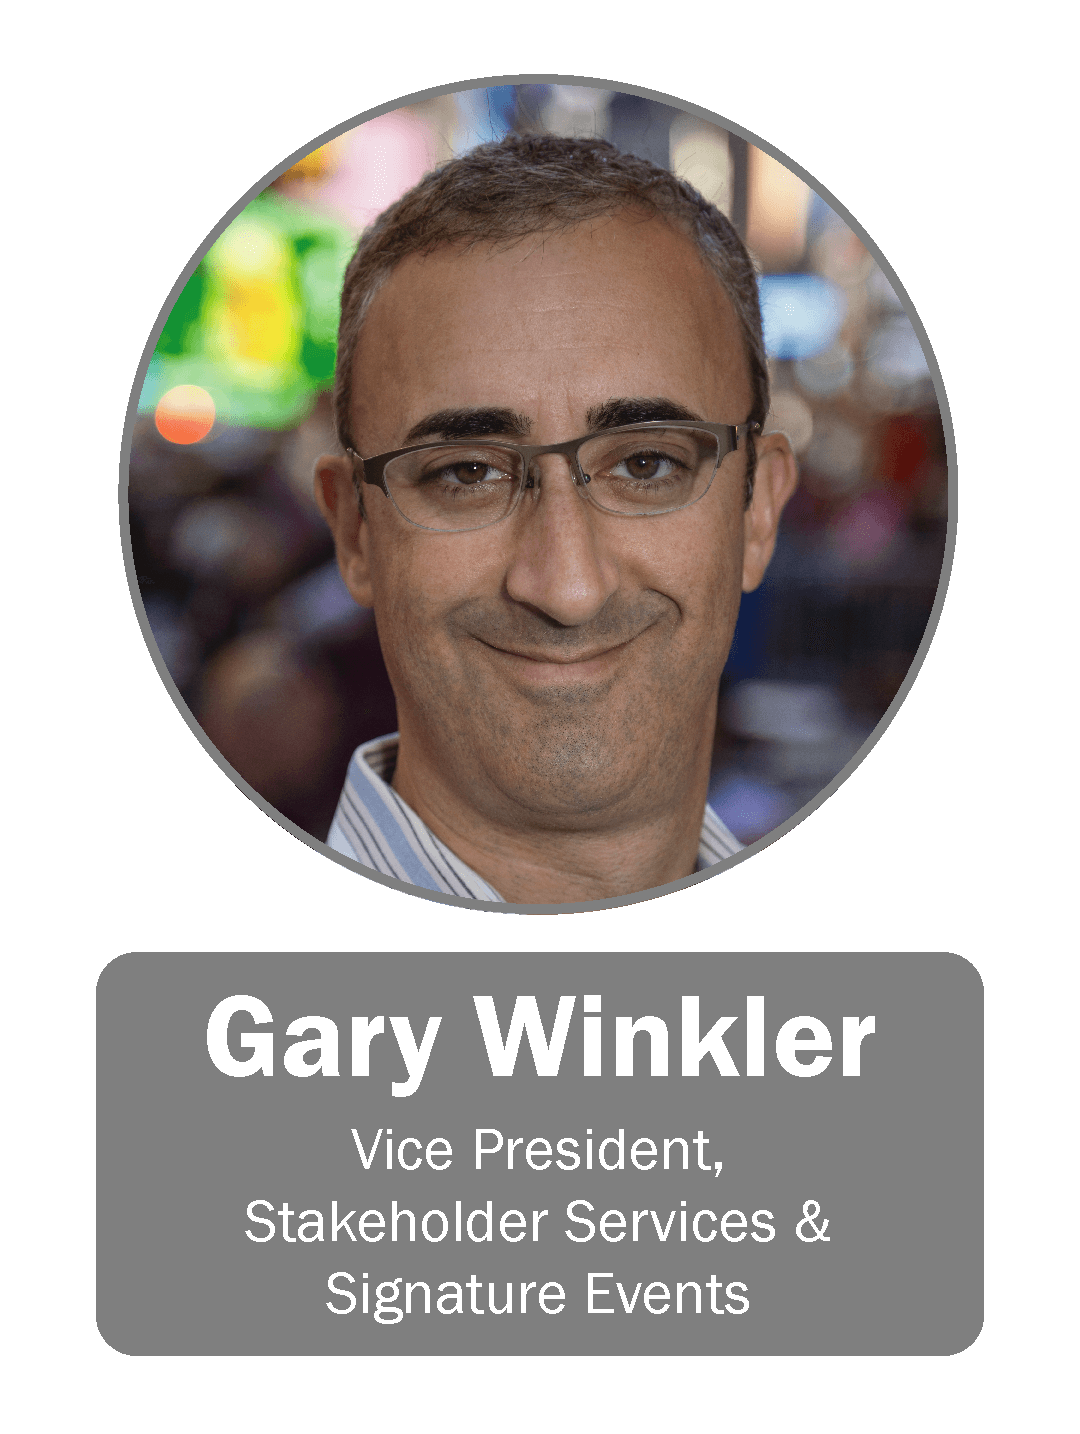 Gary Winkler | Vice President, Stakeholder Services & Signature Events